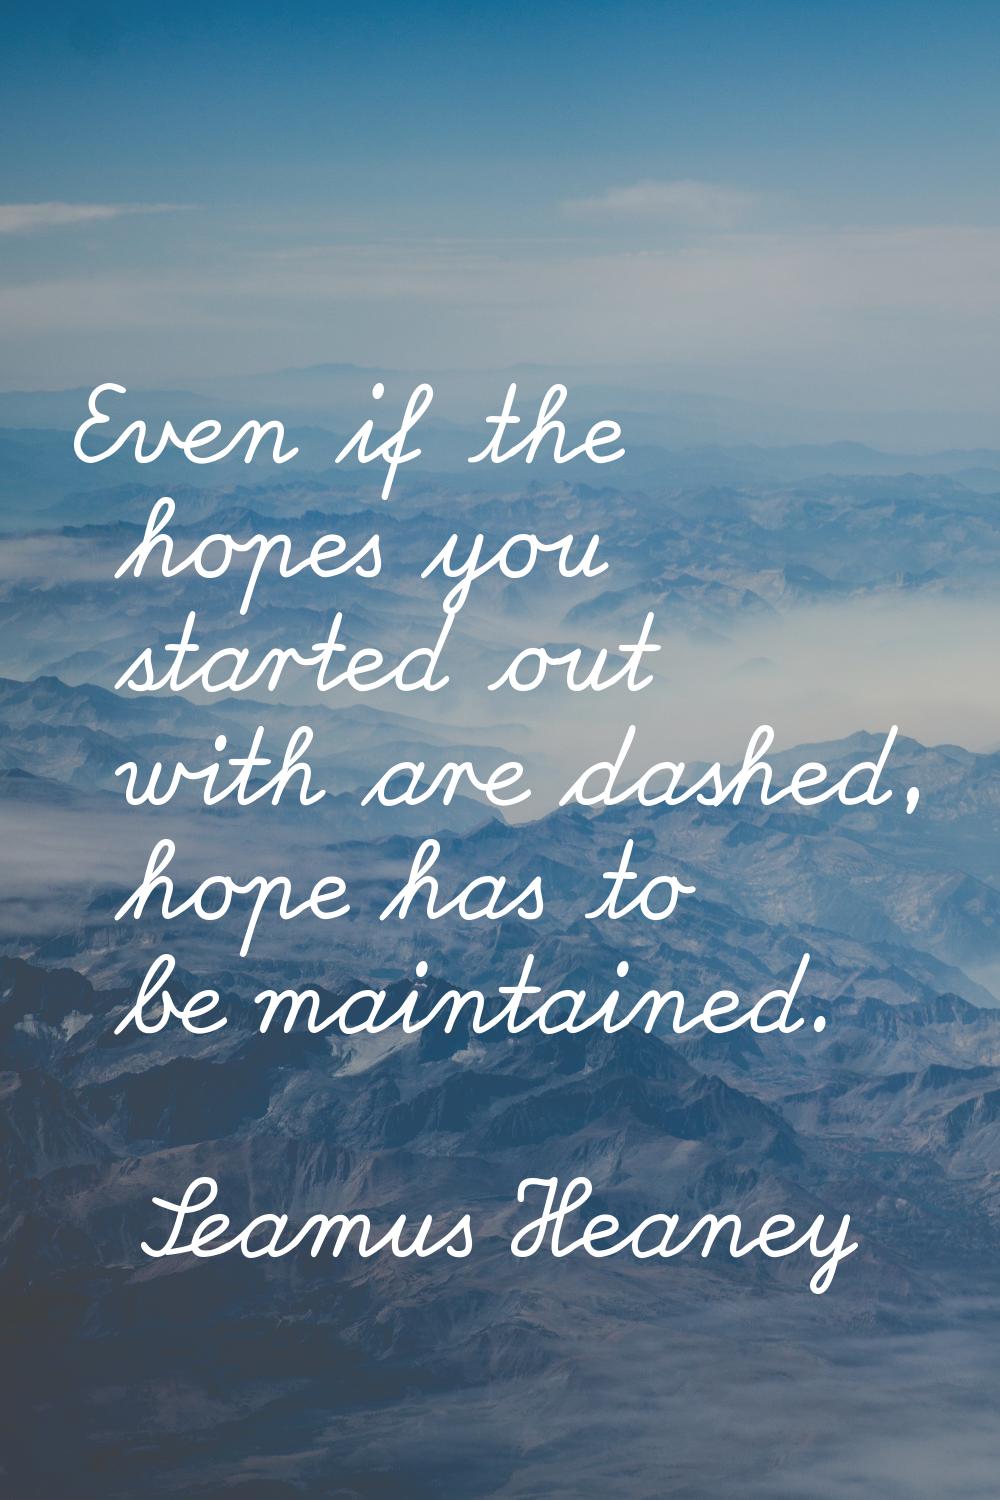 Even if the hopes you started out with are dashed, hope has to be maintained.